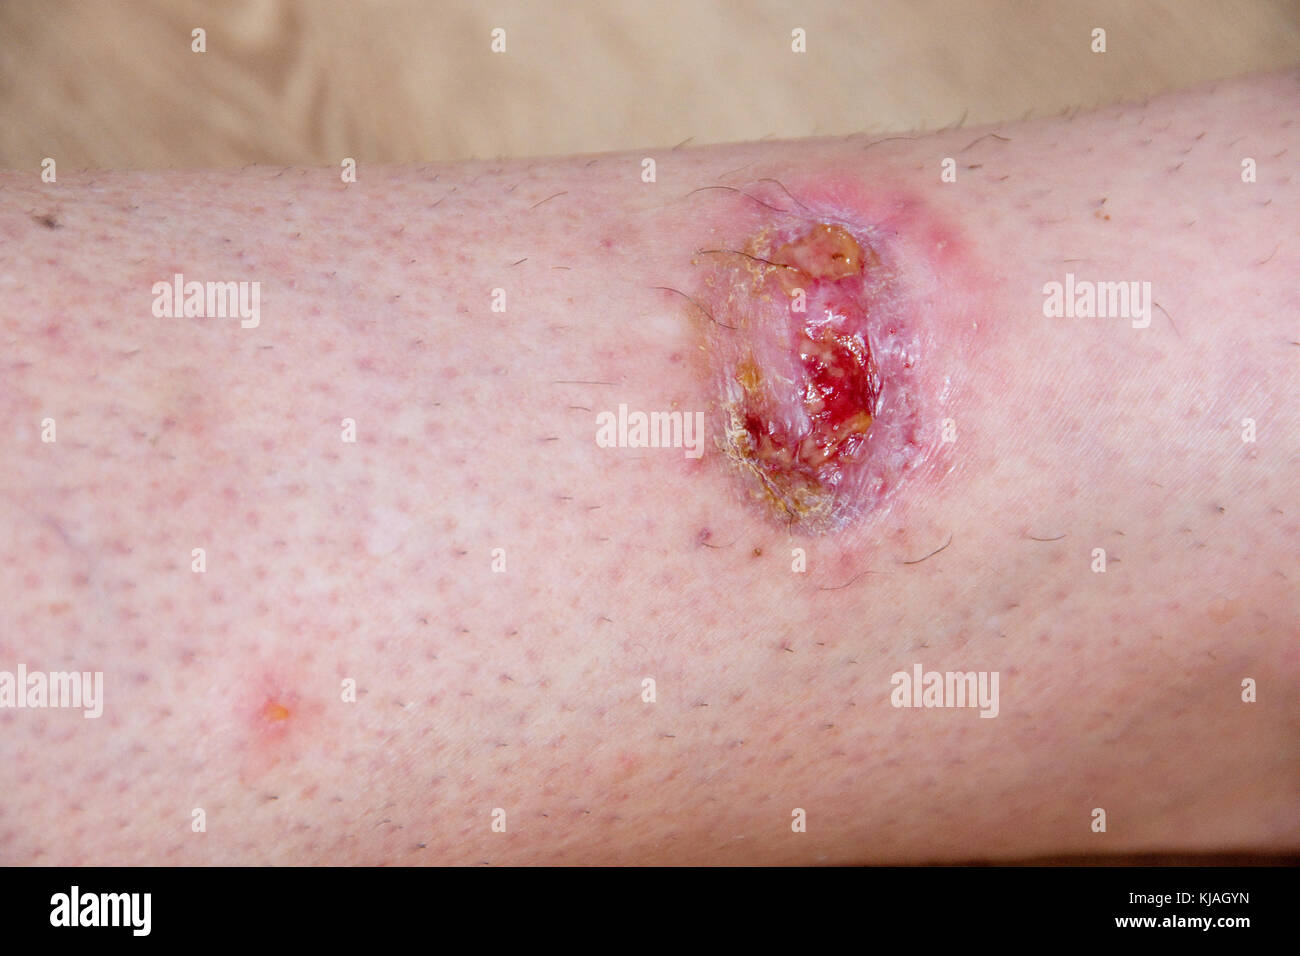 Post operative wound struggles to heal as skin graft fails : open sore wound on lower shin following removal of a tumour Stock Photo